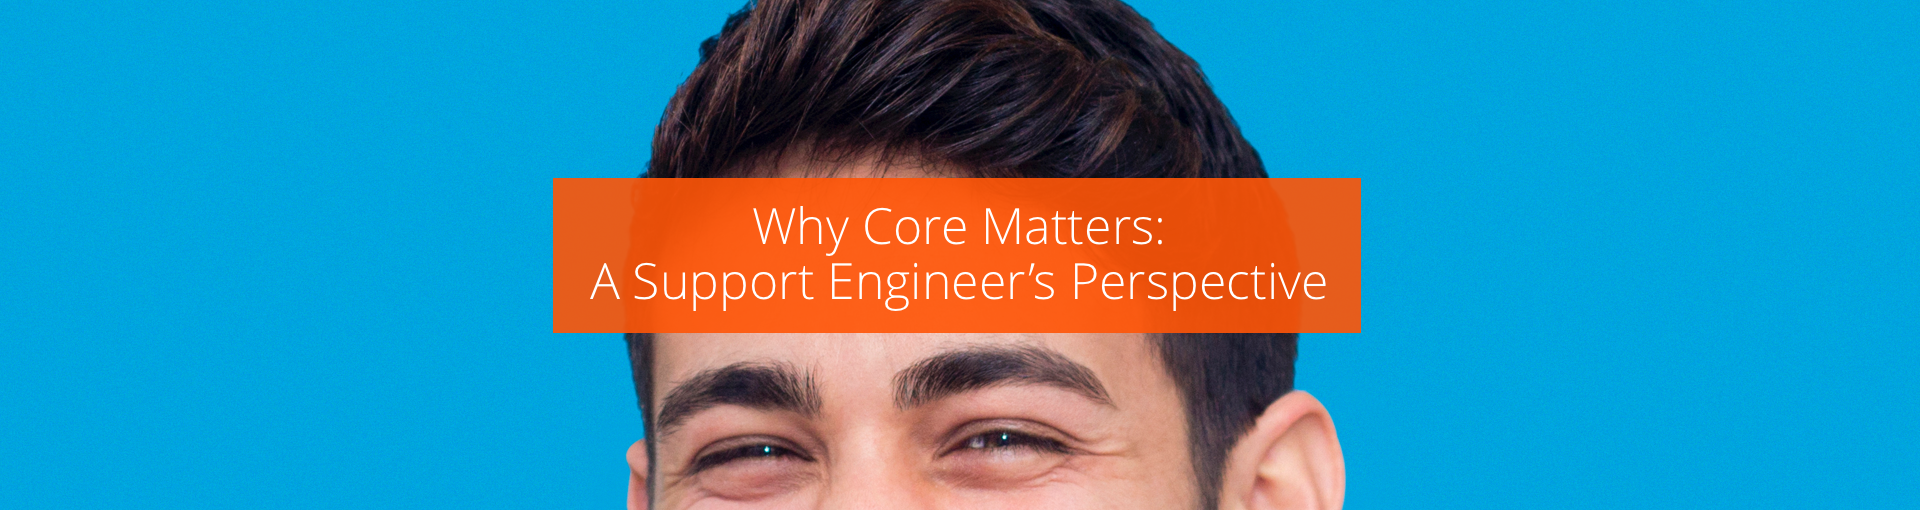 Why CORE Matters: A Support Engineer’s Perspective Featured Image